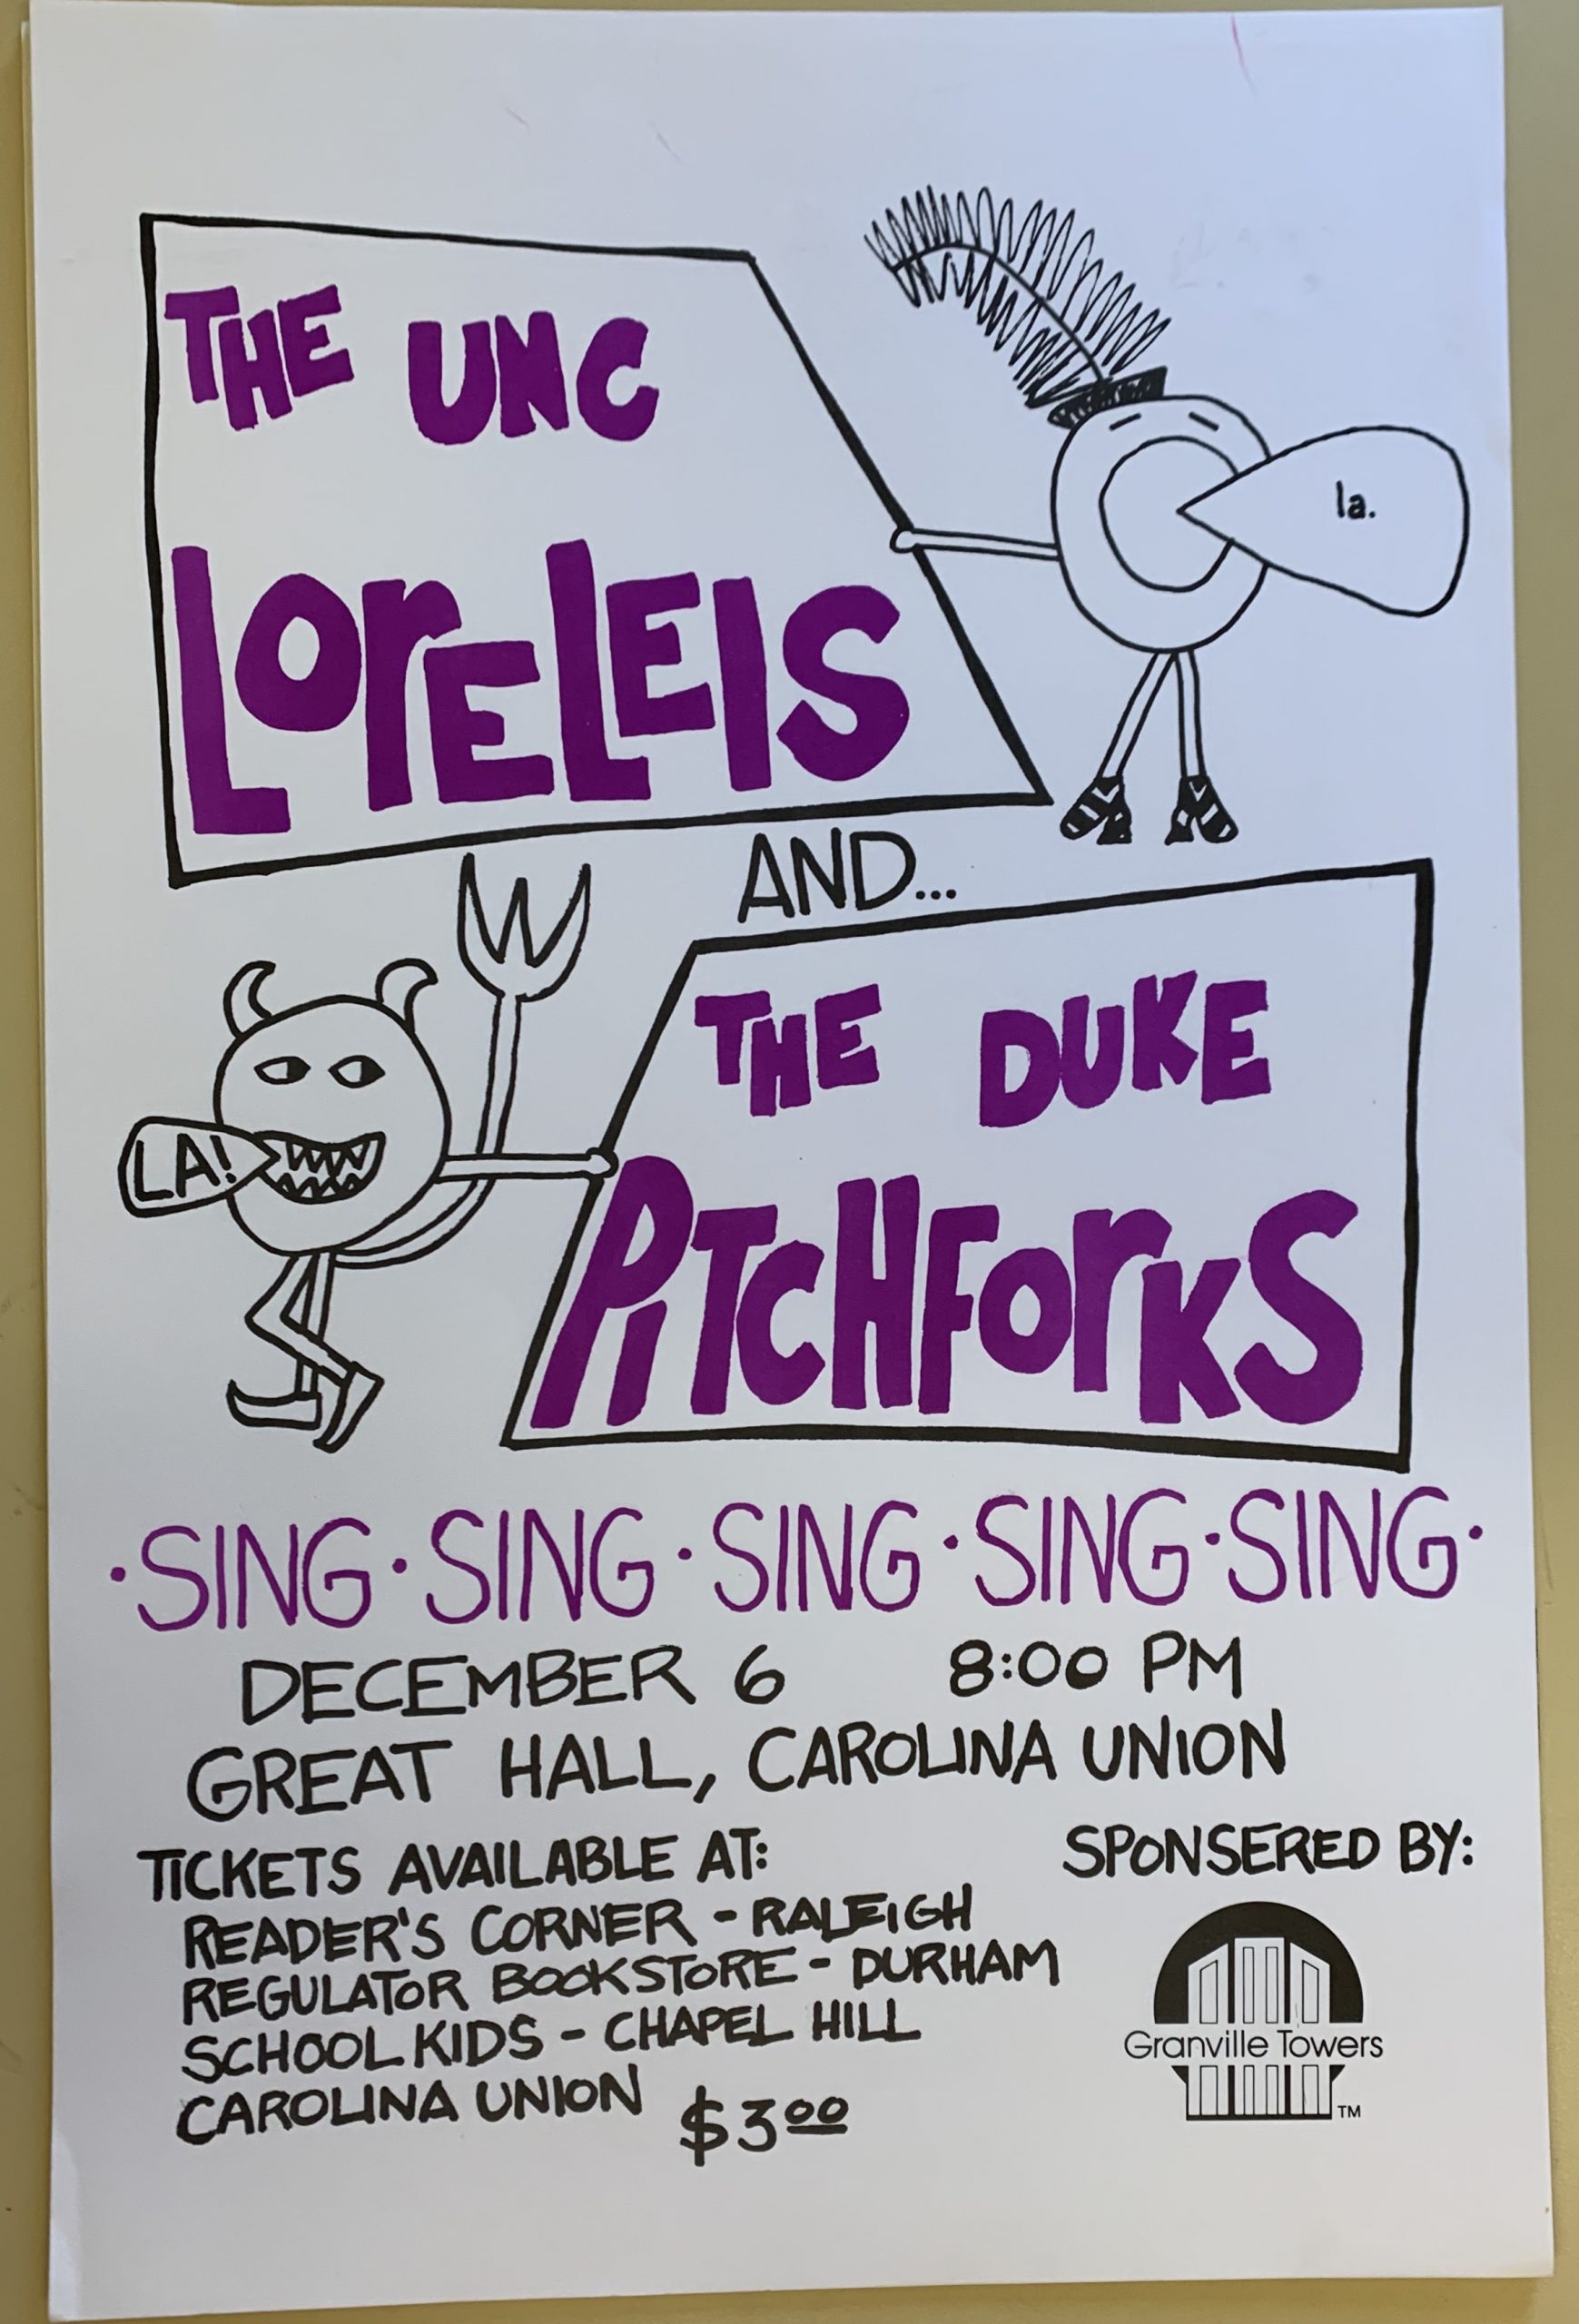 The UNC Loreleis and the Duke Pitchforks purple and black hand-drawn flyer.